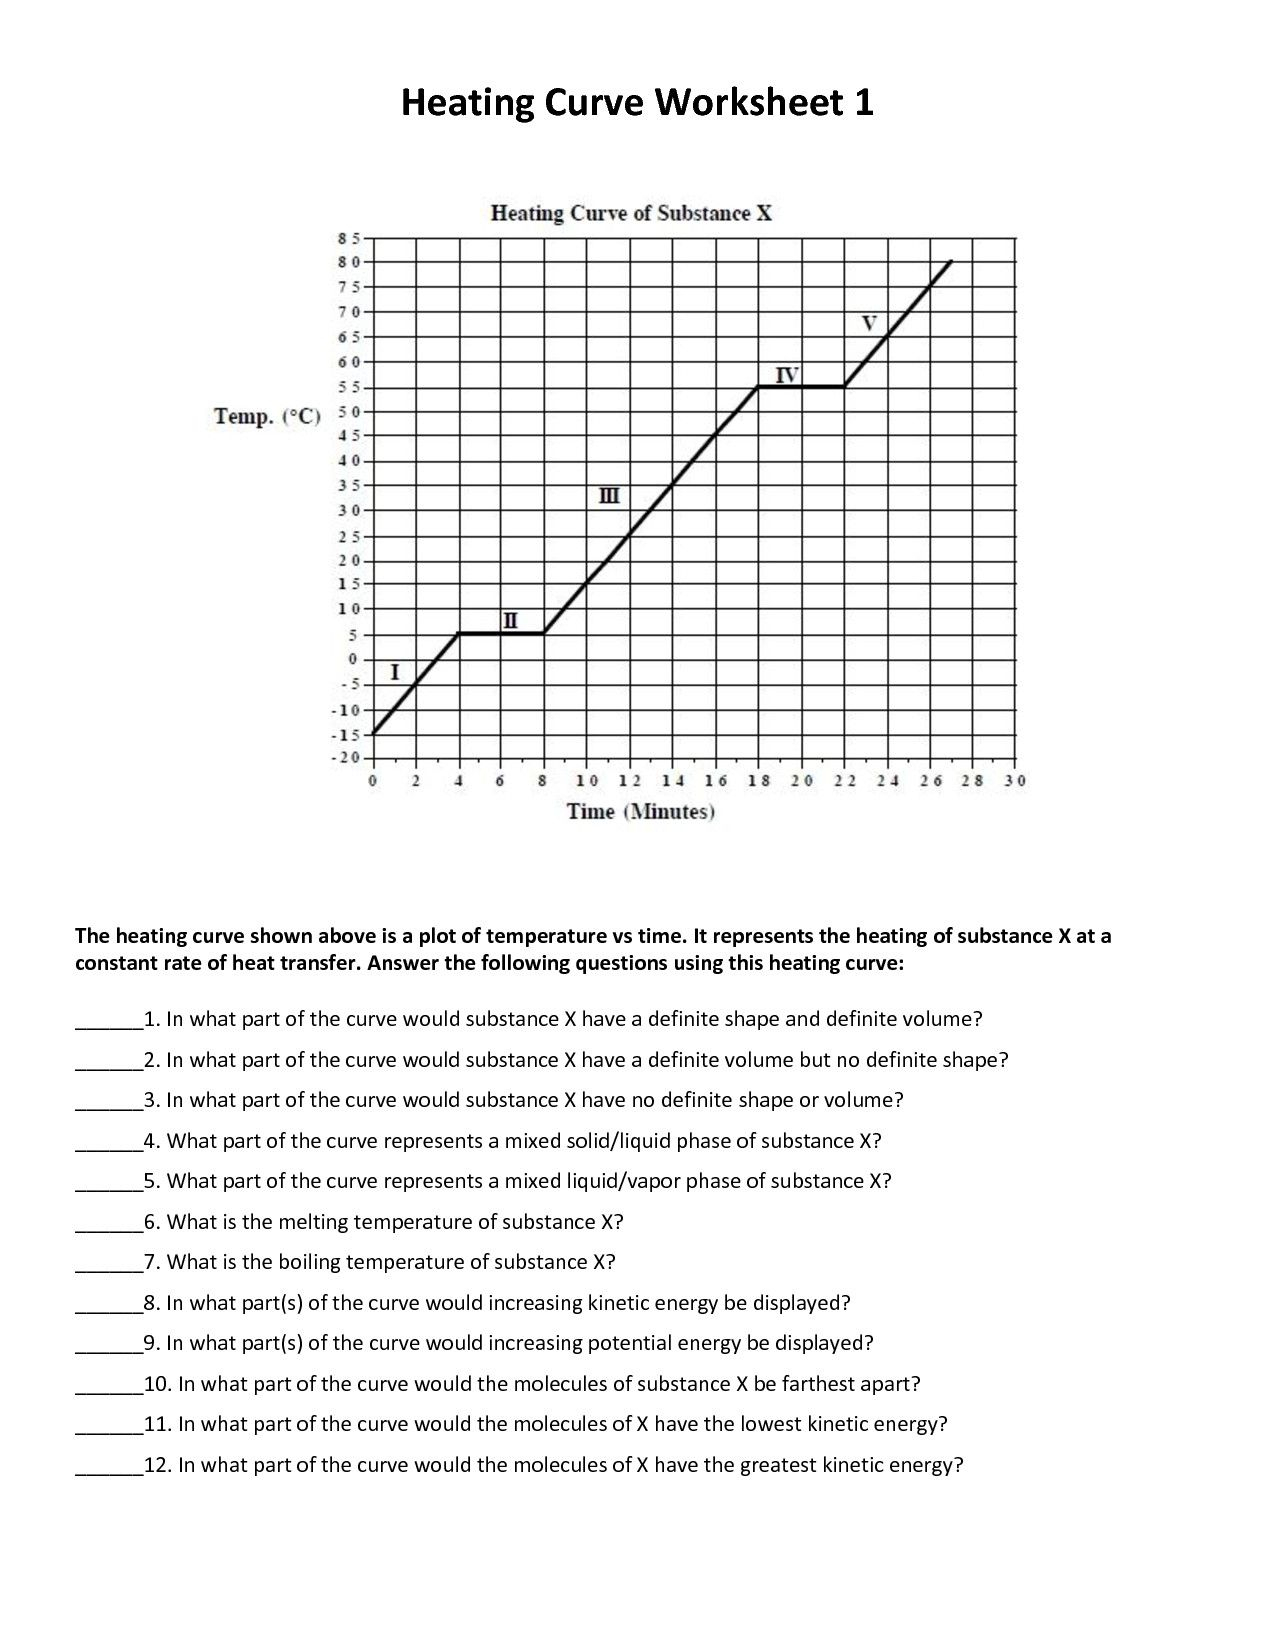 FormalRecent Chemistry Heating Curve Worksheet Answers